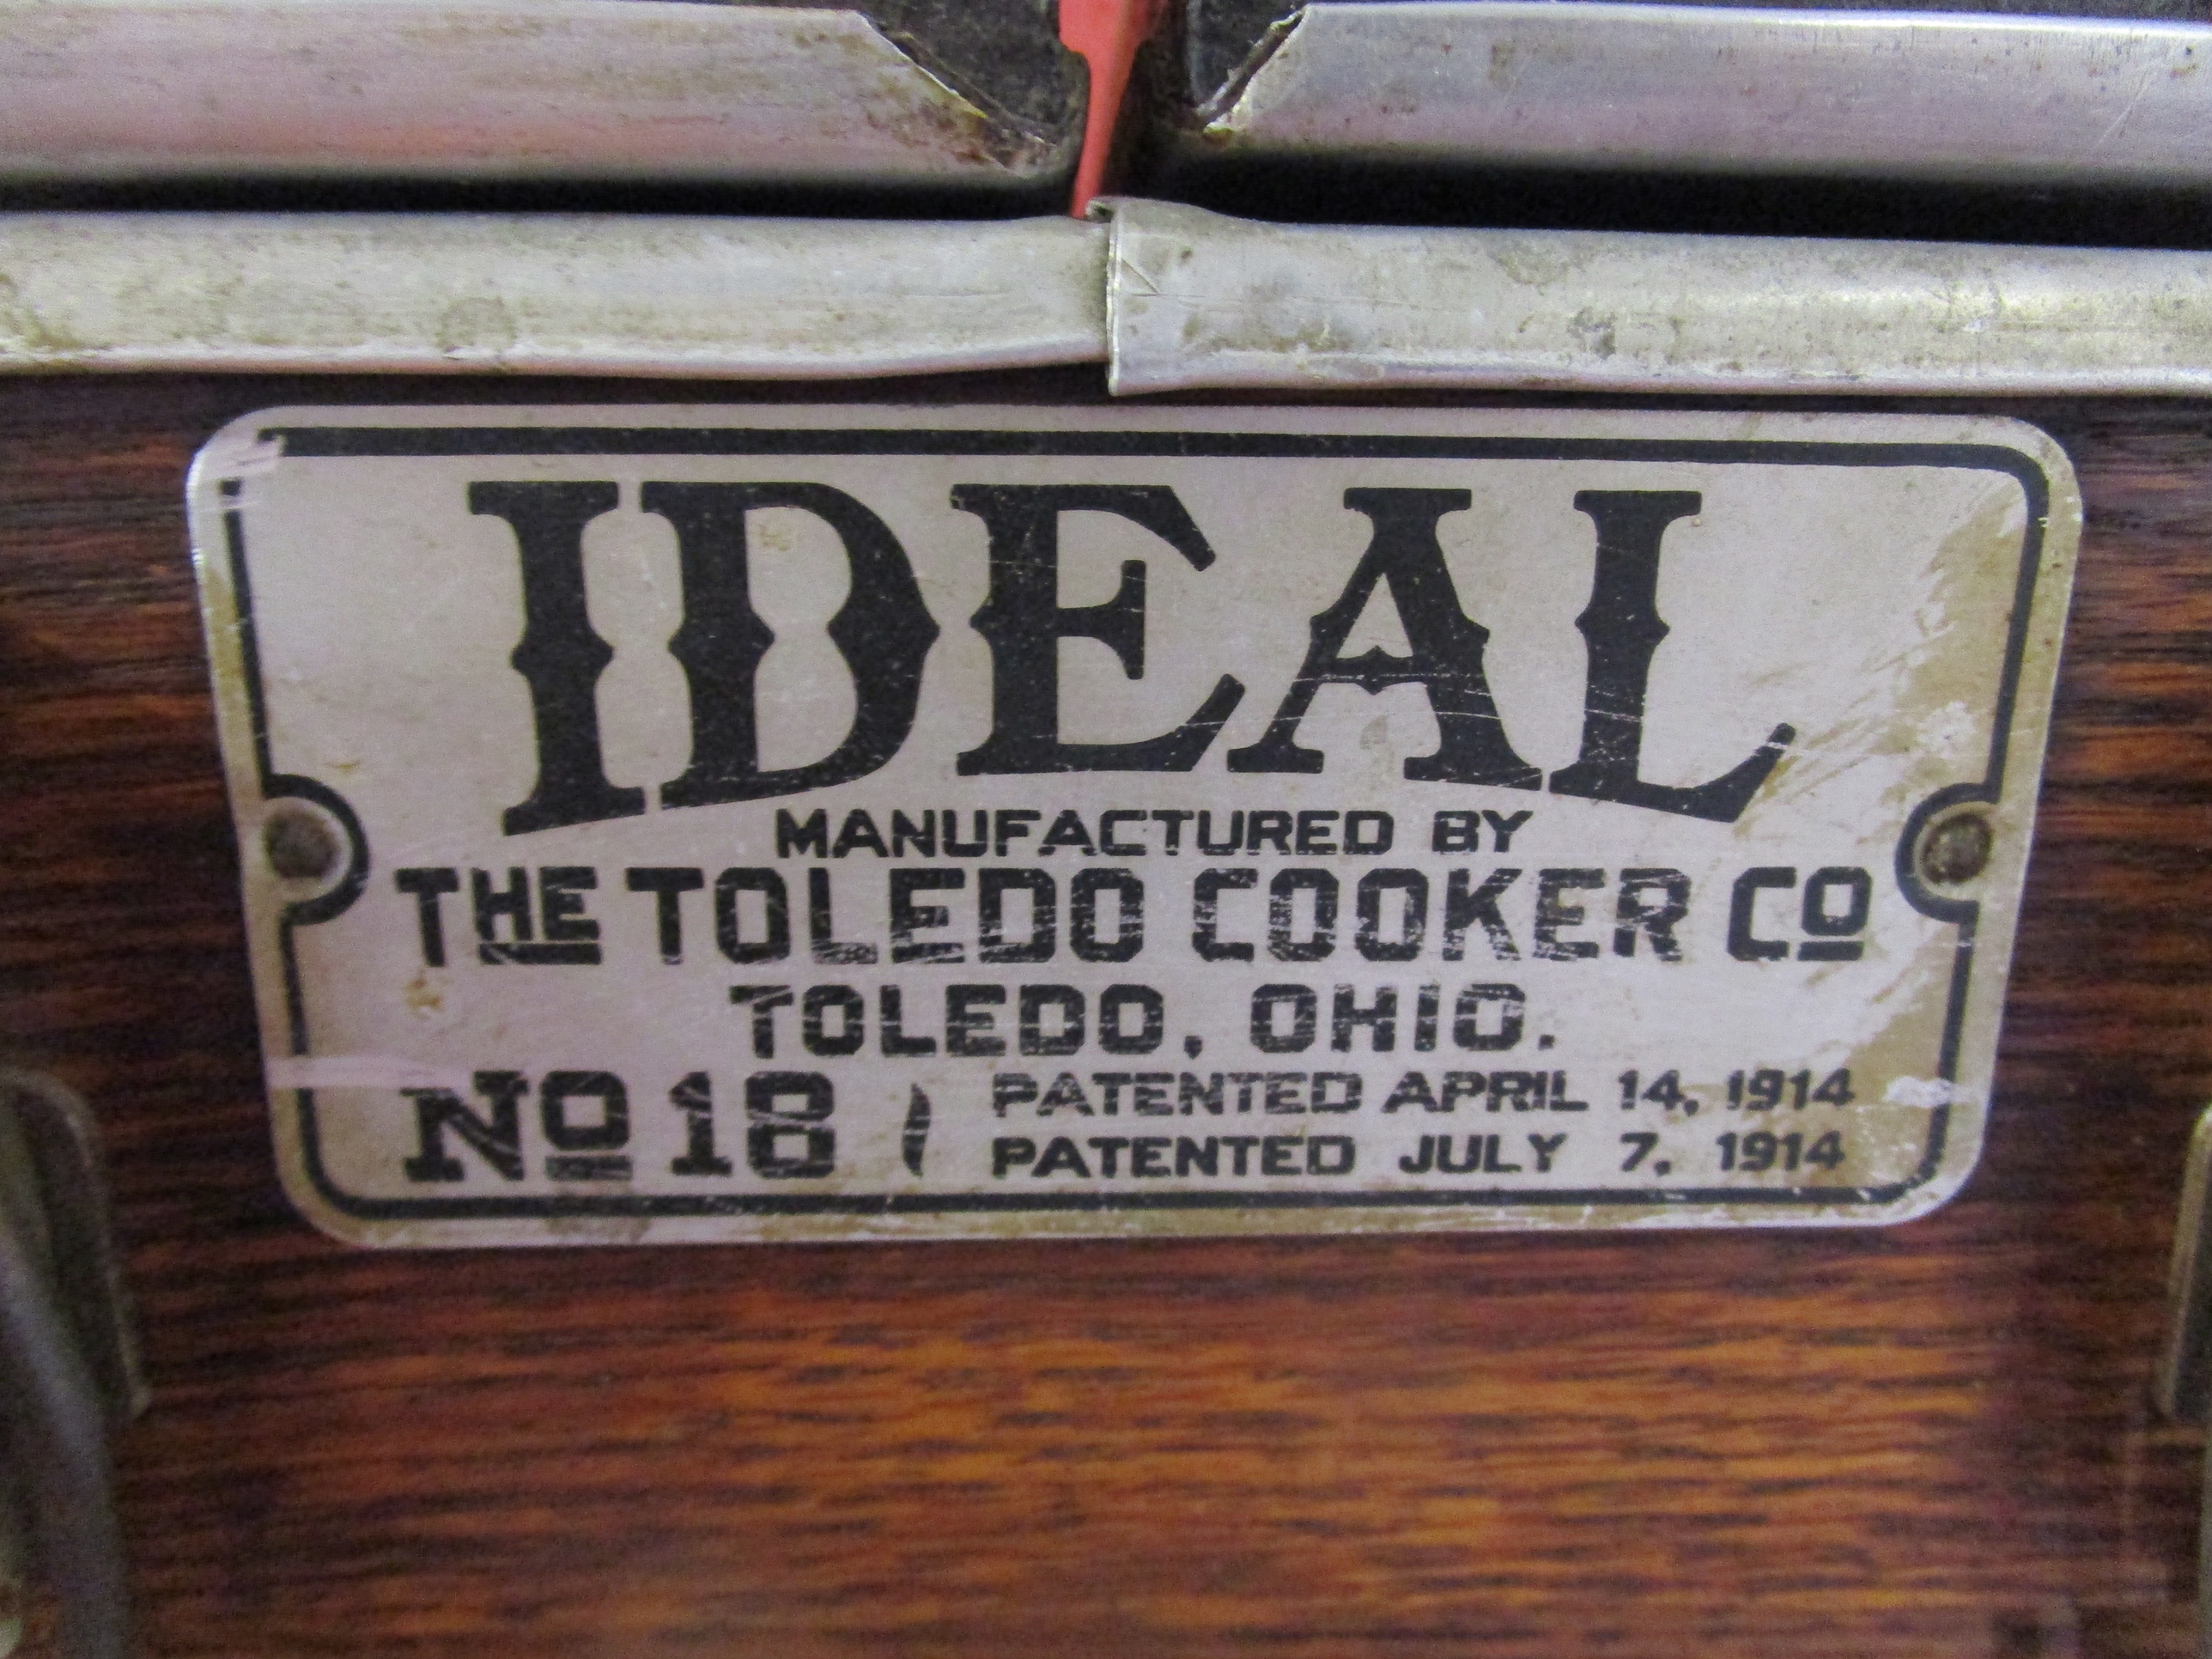 Rare and unusual early 20thC American slow cooker (complete) Model No 18 ‘Ideal’ manufactured by The - Image 20 of 20